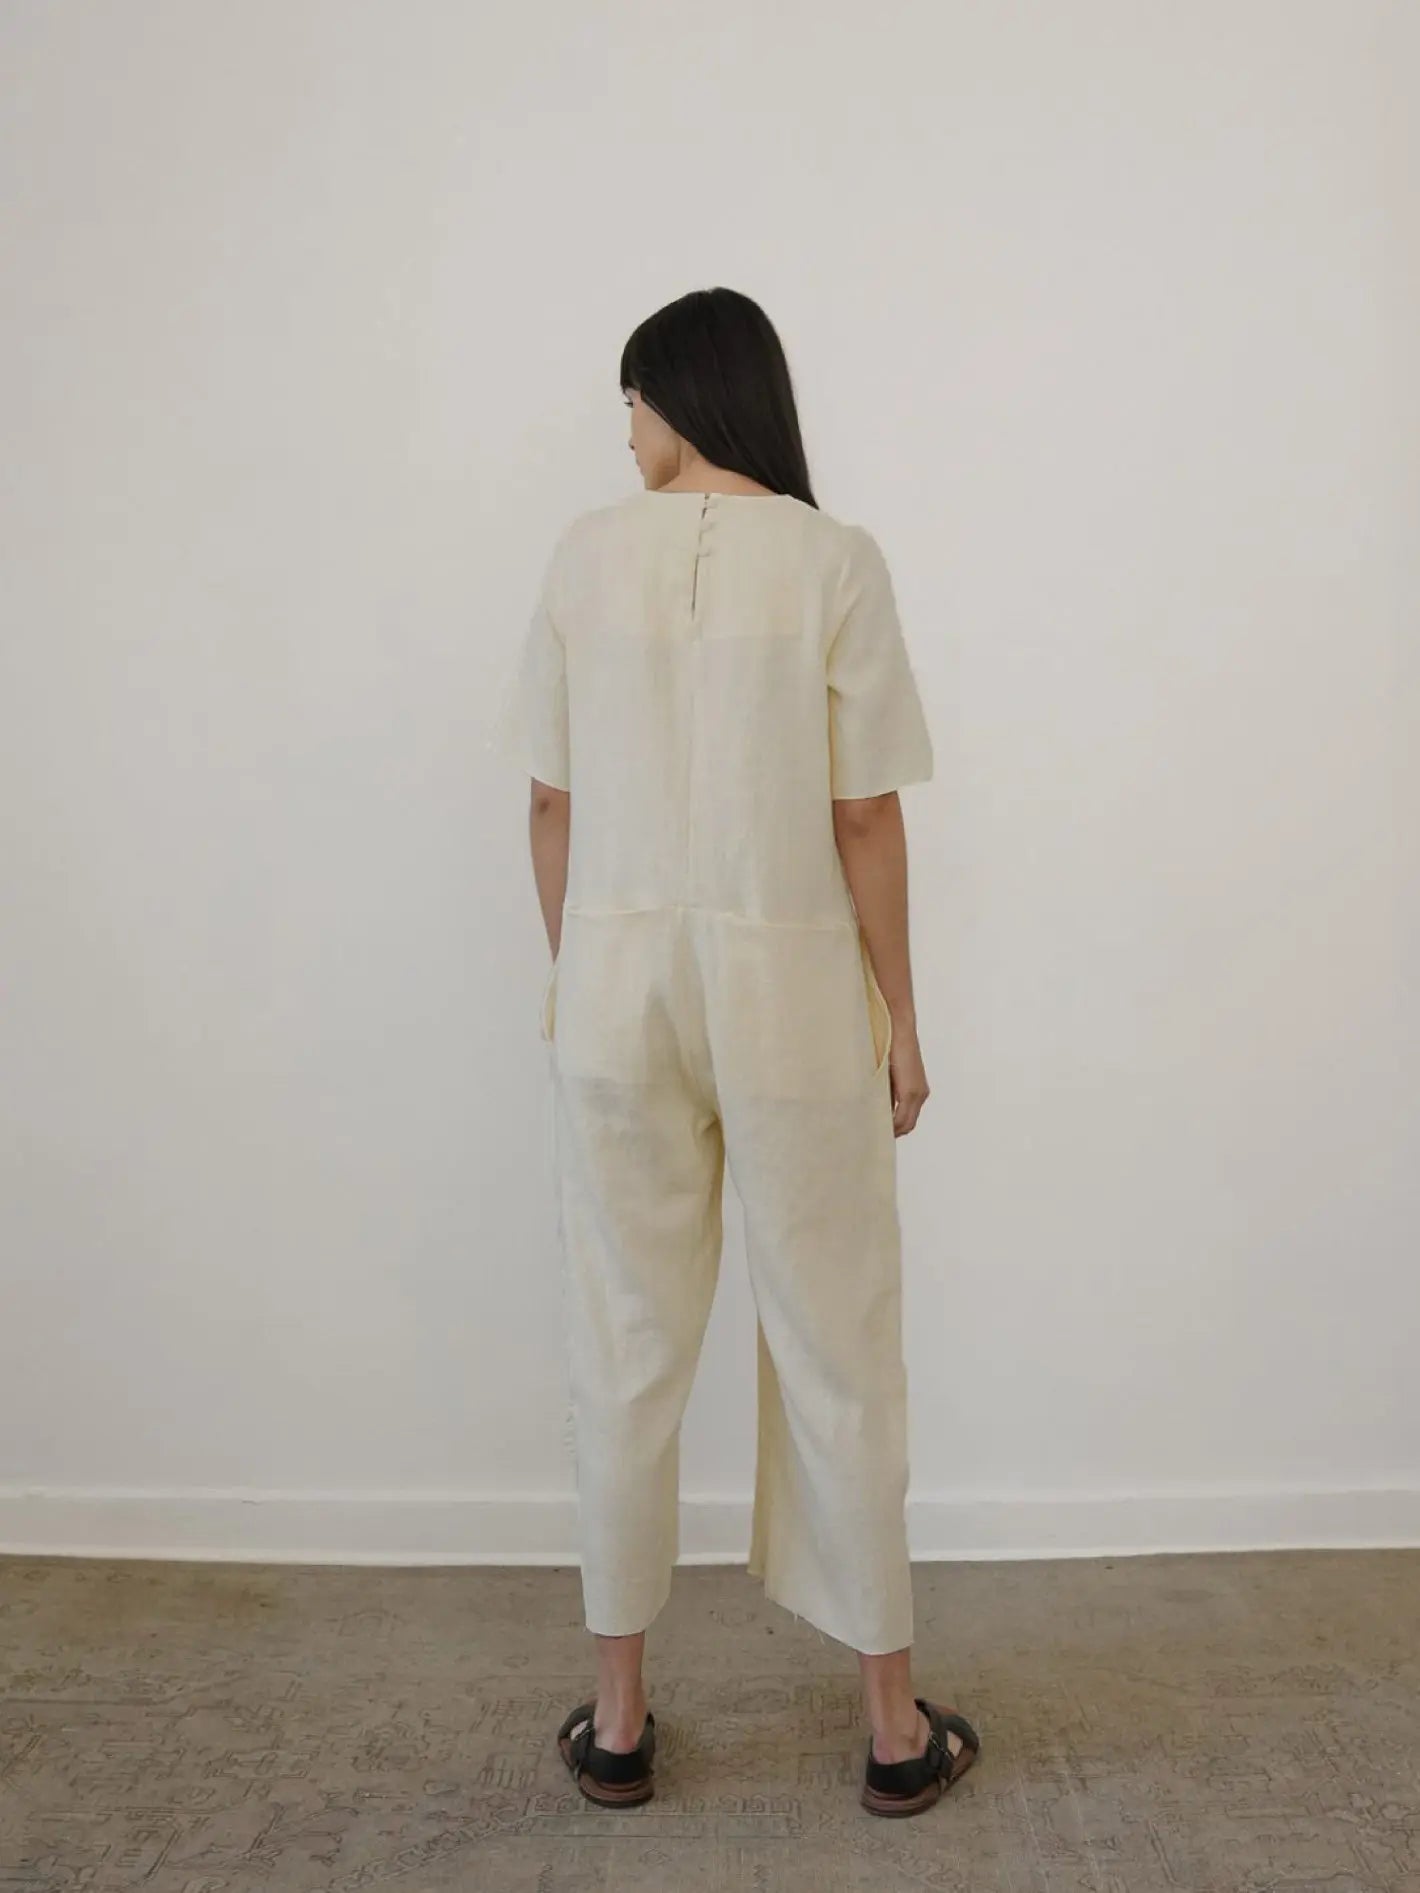 A woman with long dark hair stands facing a plain white wall, inside what appears to be a well-lit store in Barcelona. She is wearing the June Jumpsuit Beige by Zii Ropa and black sandals. The floor is light brown, possibly carpeted.